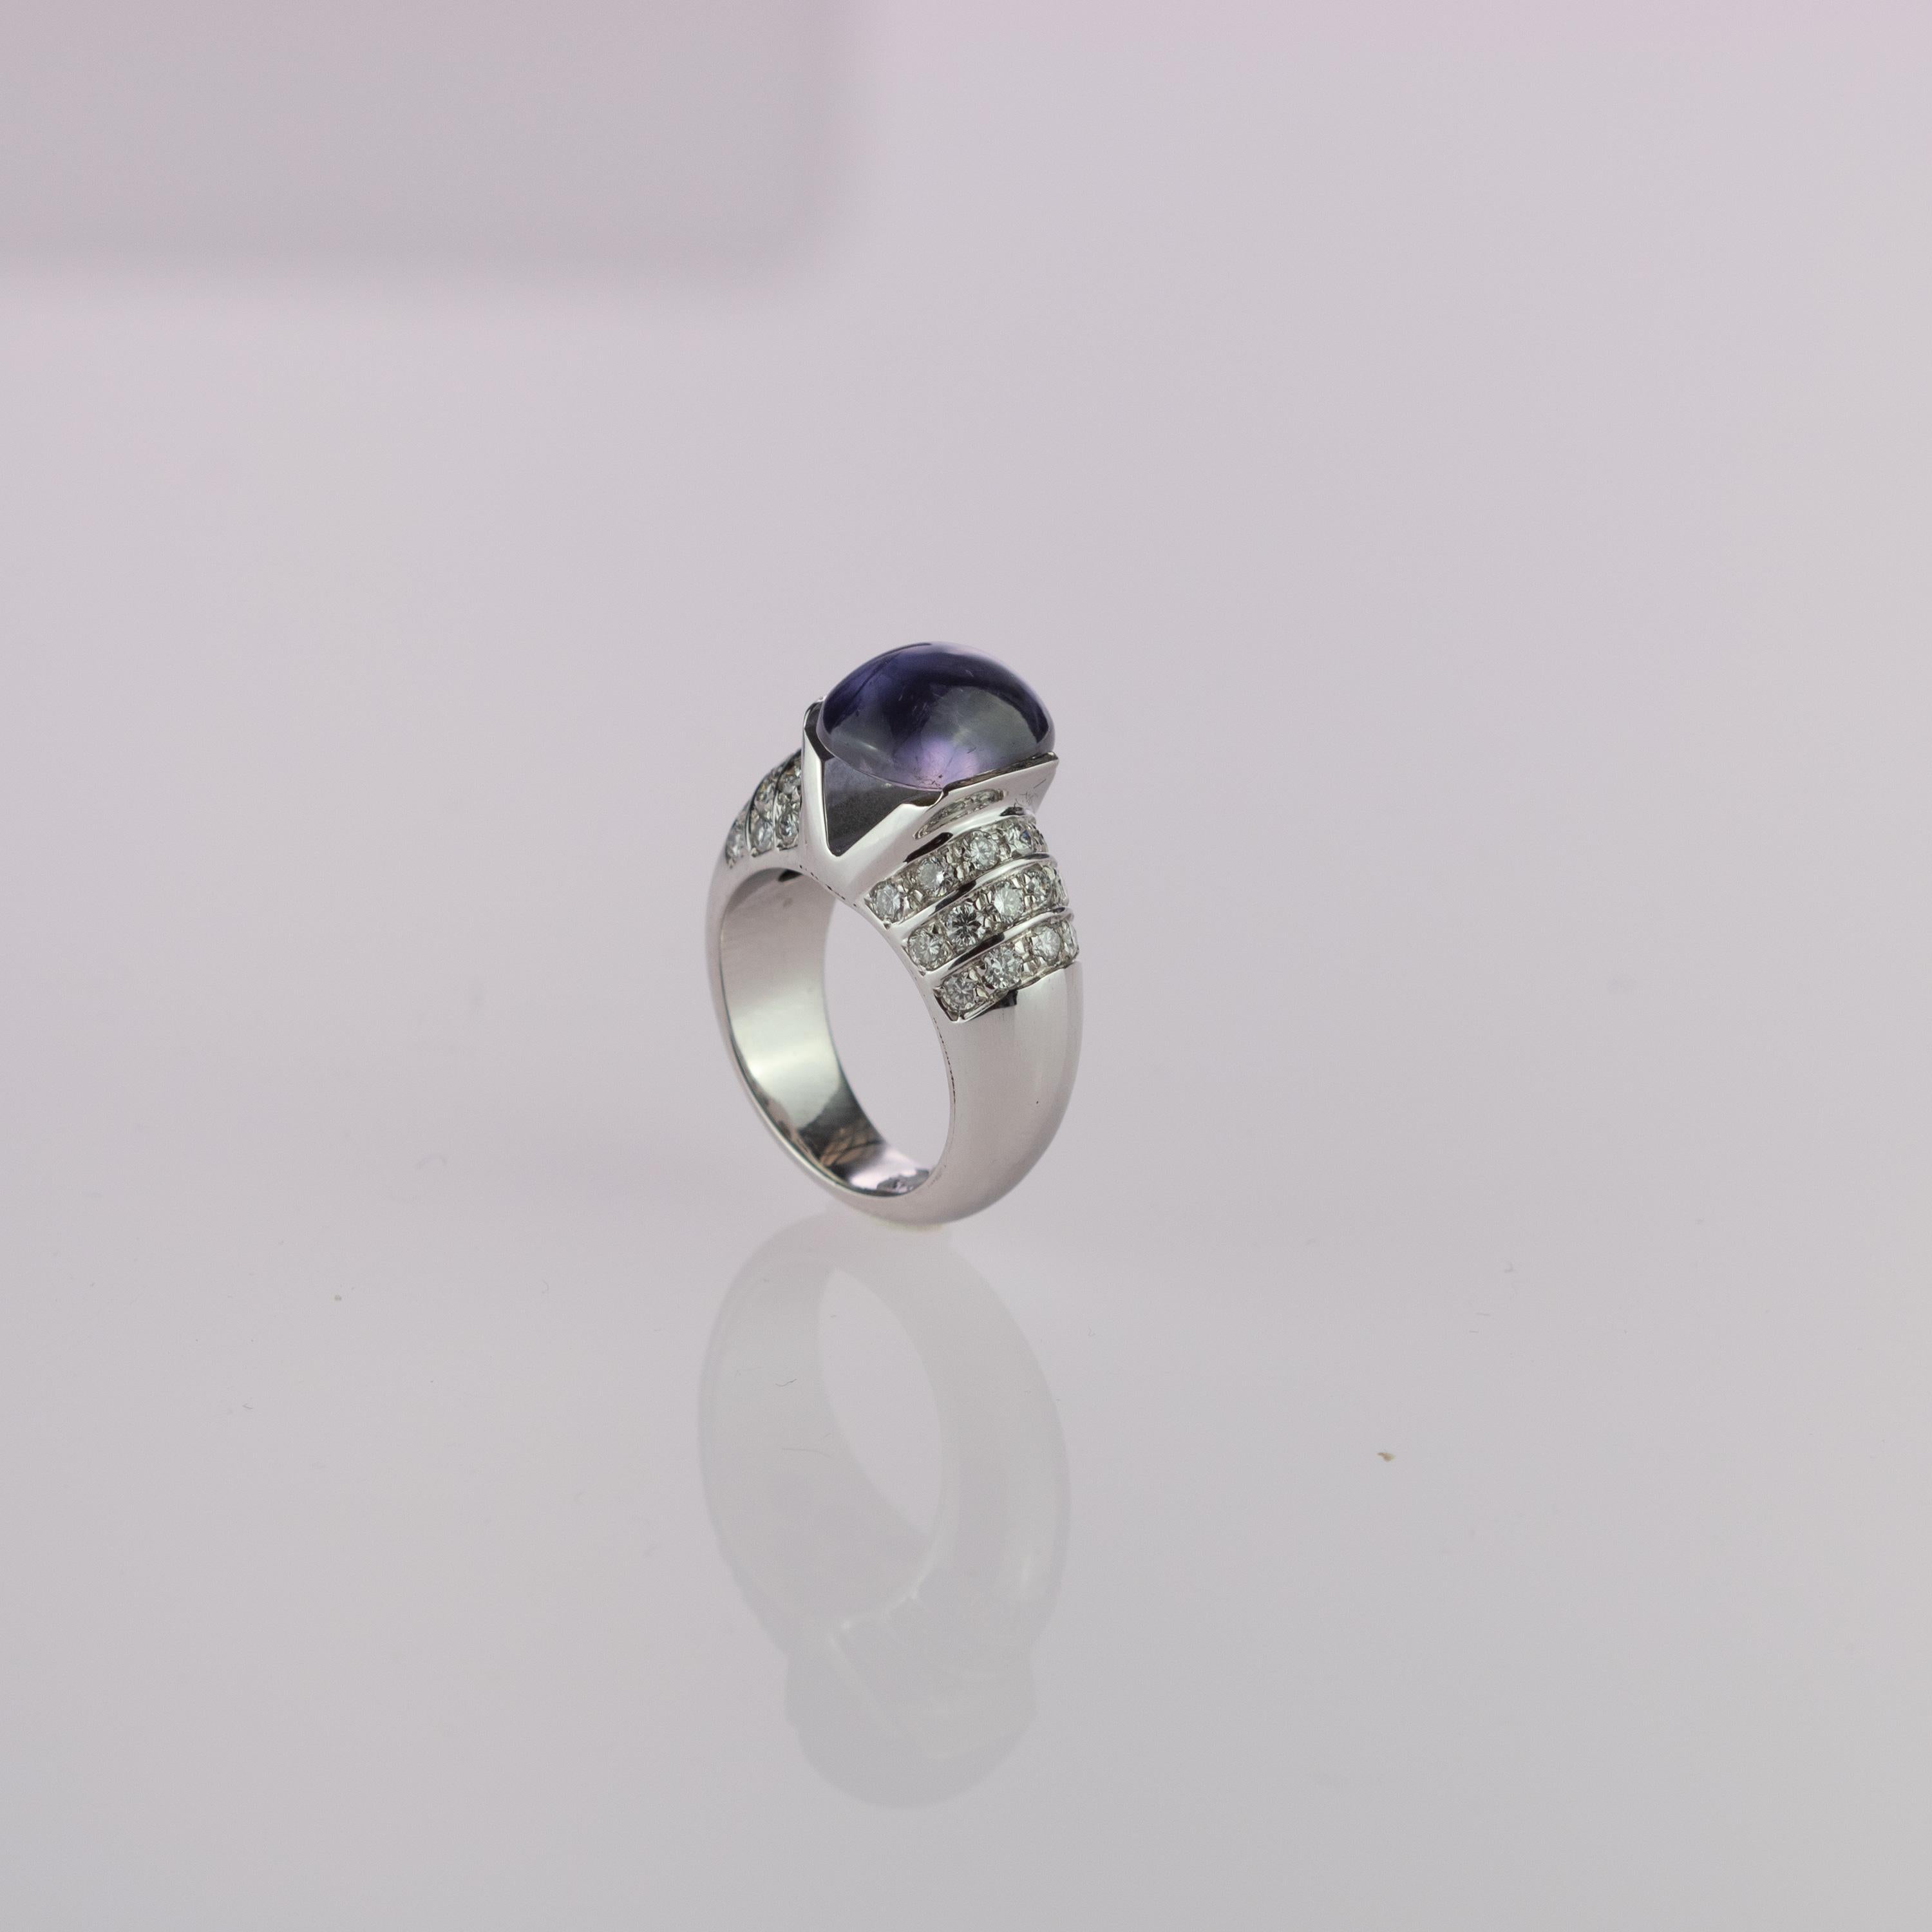 Admire a splendid and unique ring full of beauty and uniqueness. A 13 carat translucent light purple Iolite gem that melts inside of 18 karat white gold with 0.96 carat diamonds full of elegance and style. 
 
This ring is inspired by the beauty of